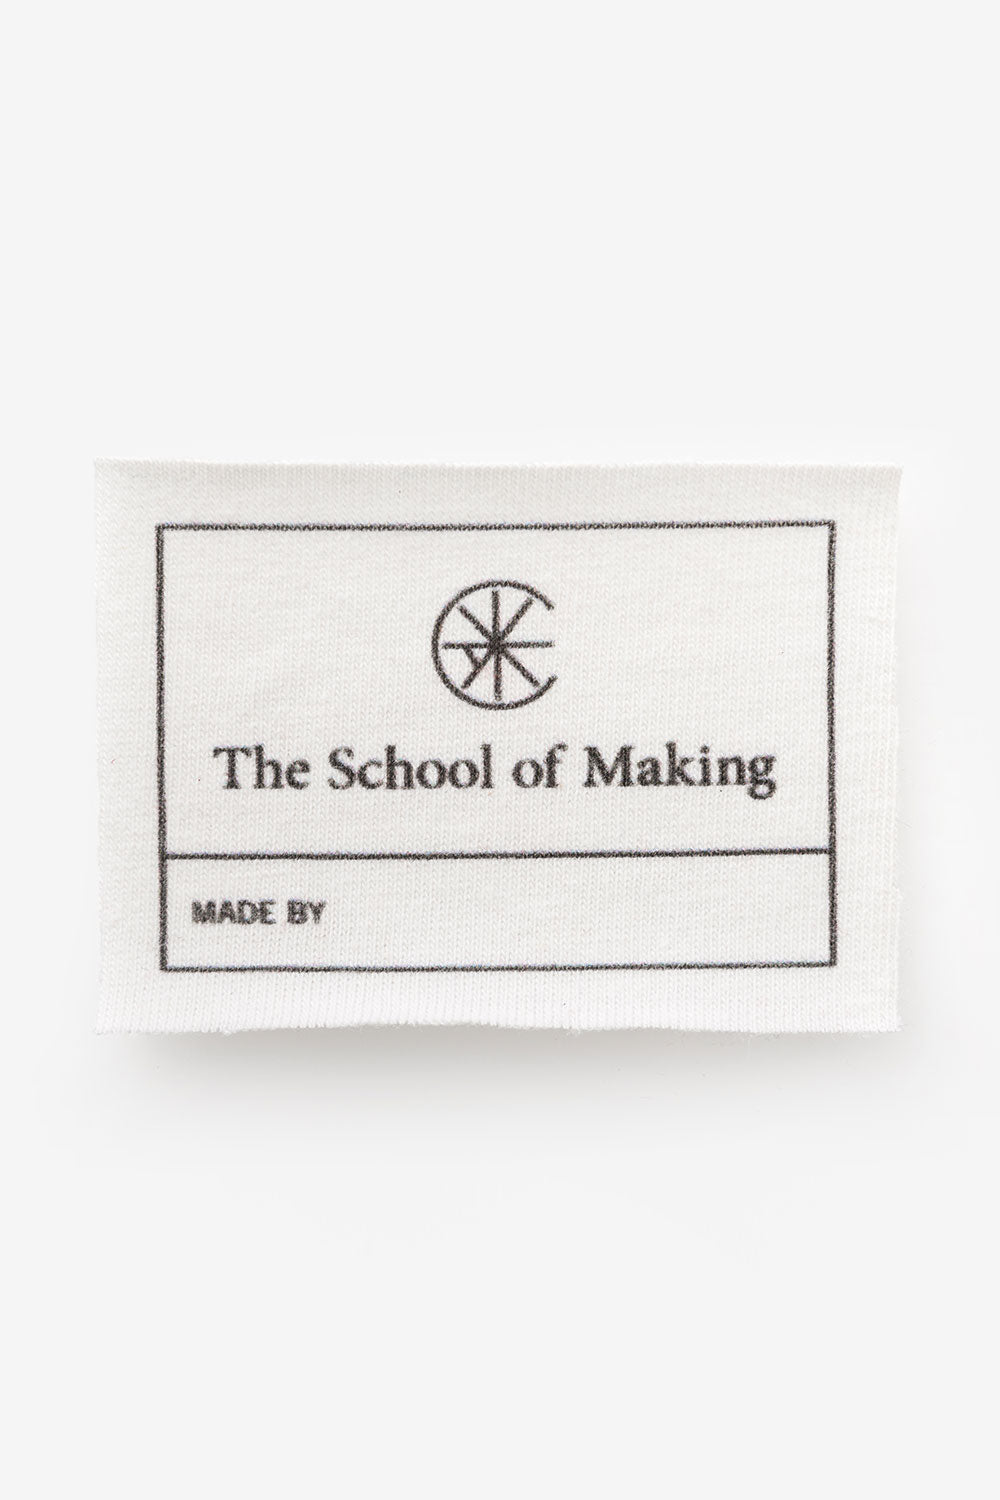 image of The School of Making Label